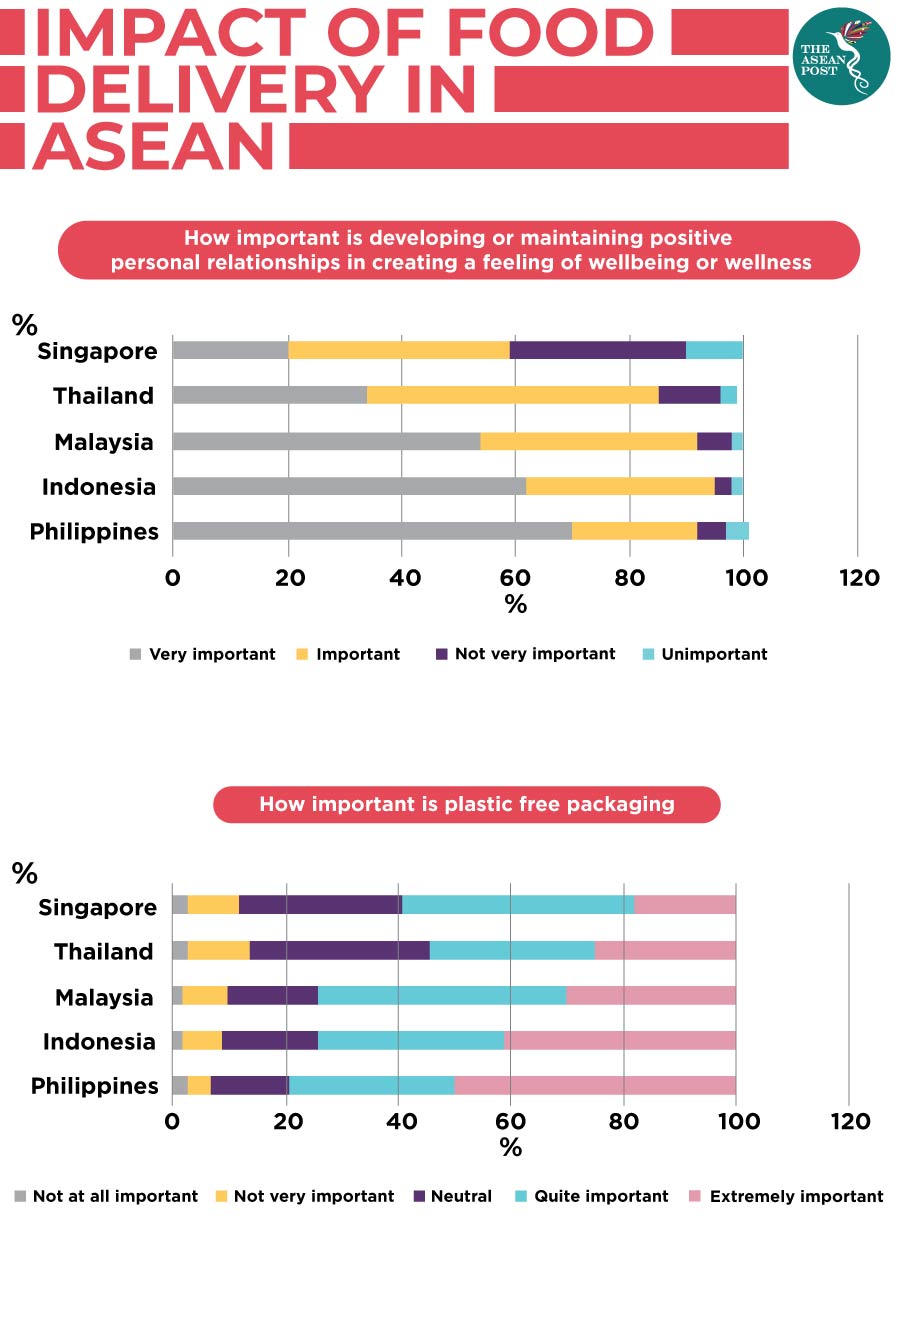 Impact of food delivery in ASEAN